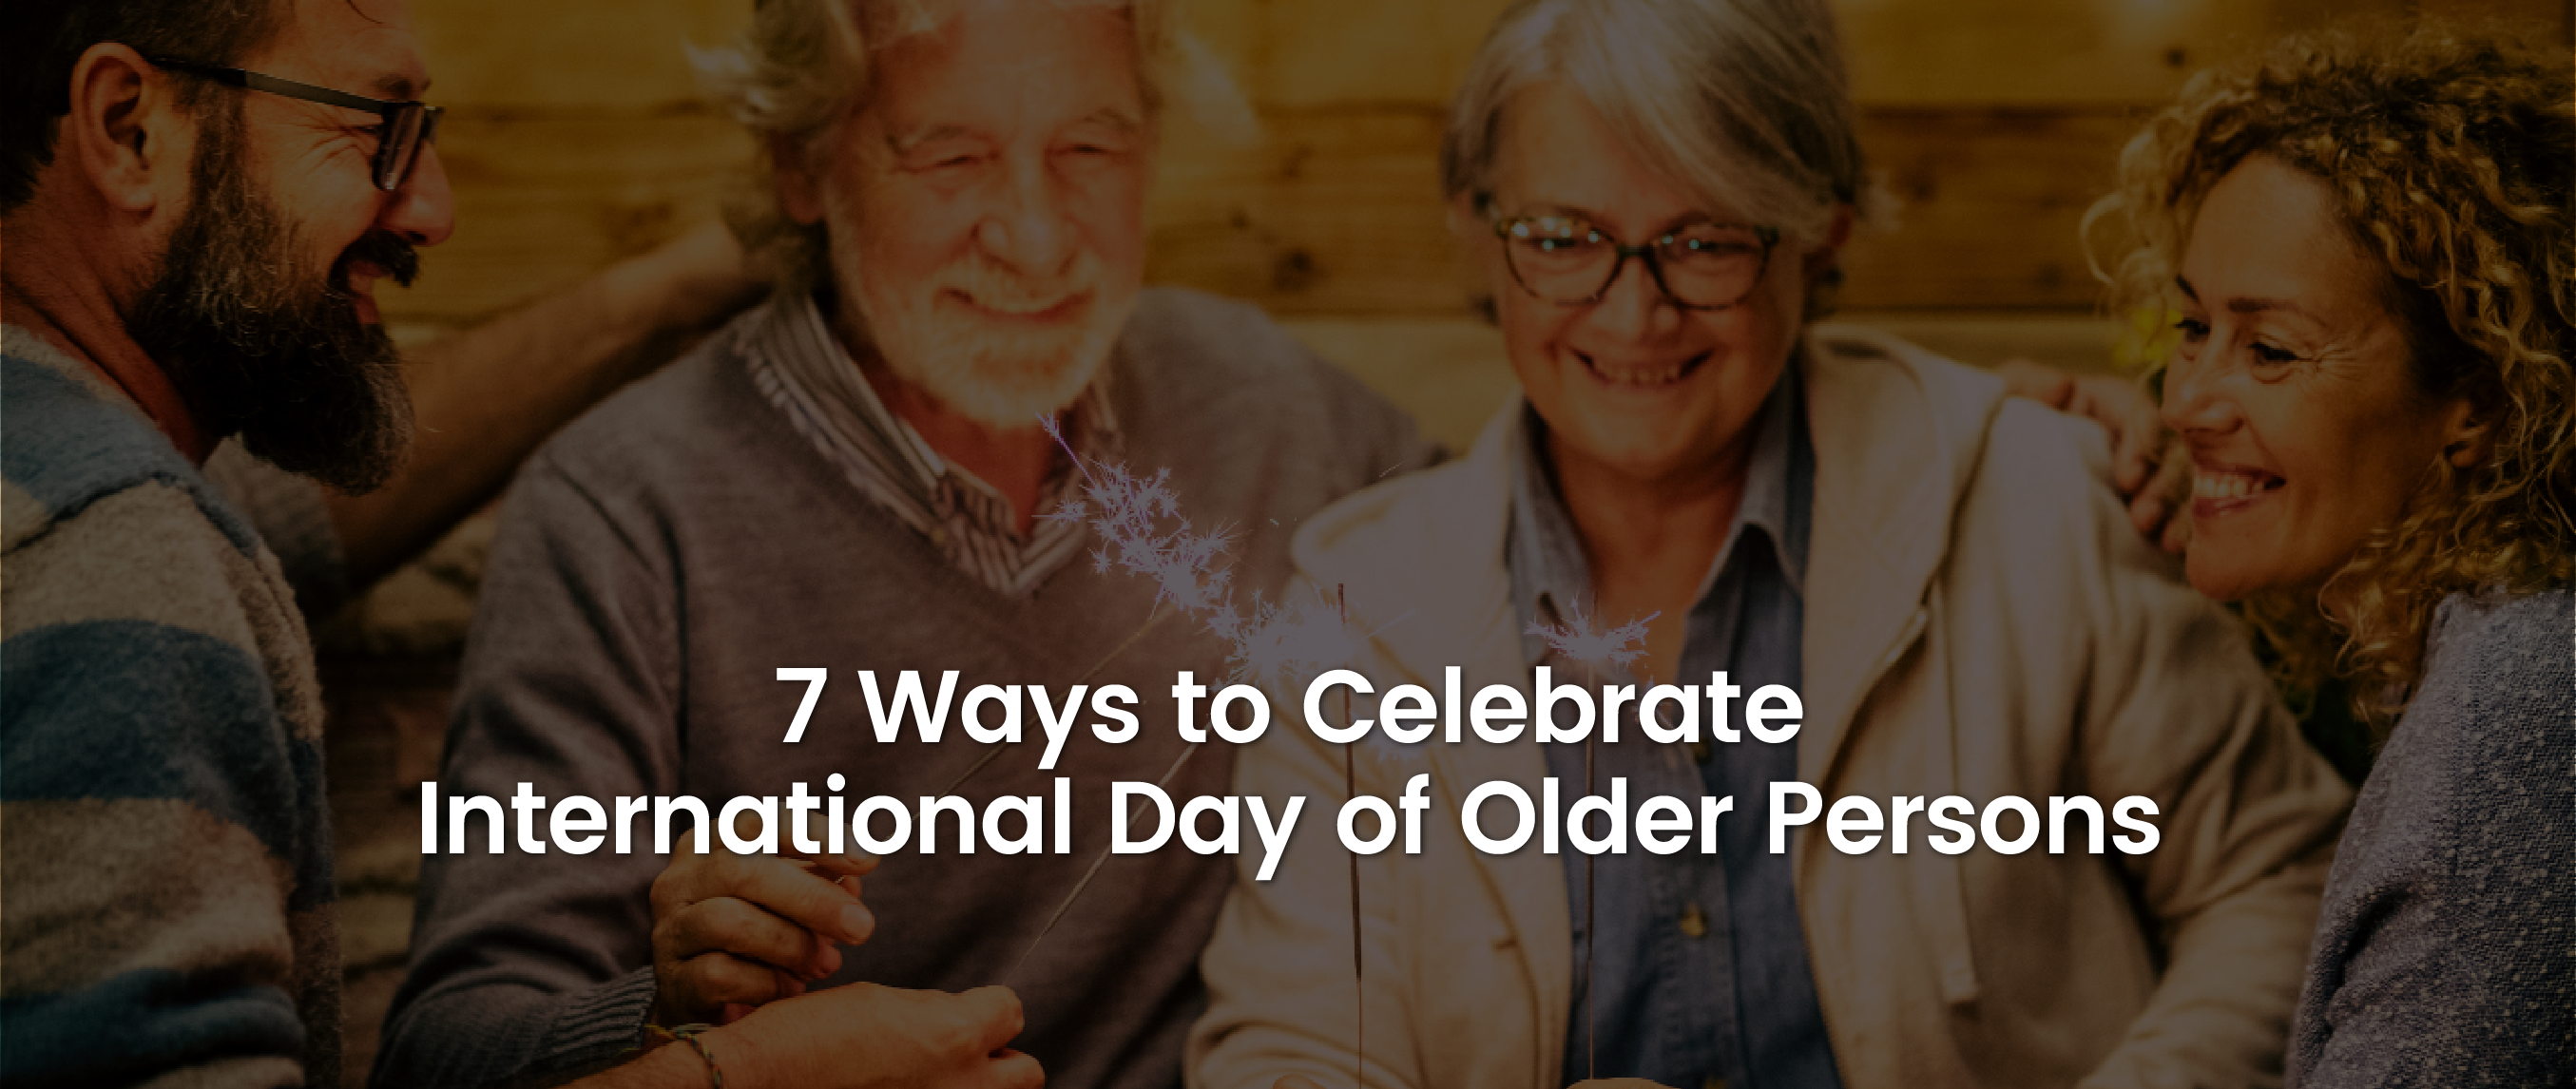 7 Ways to Celebrate International Day of Older Persons | Banner Image